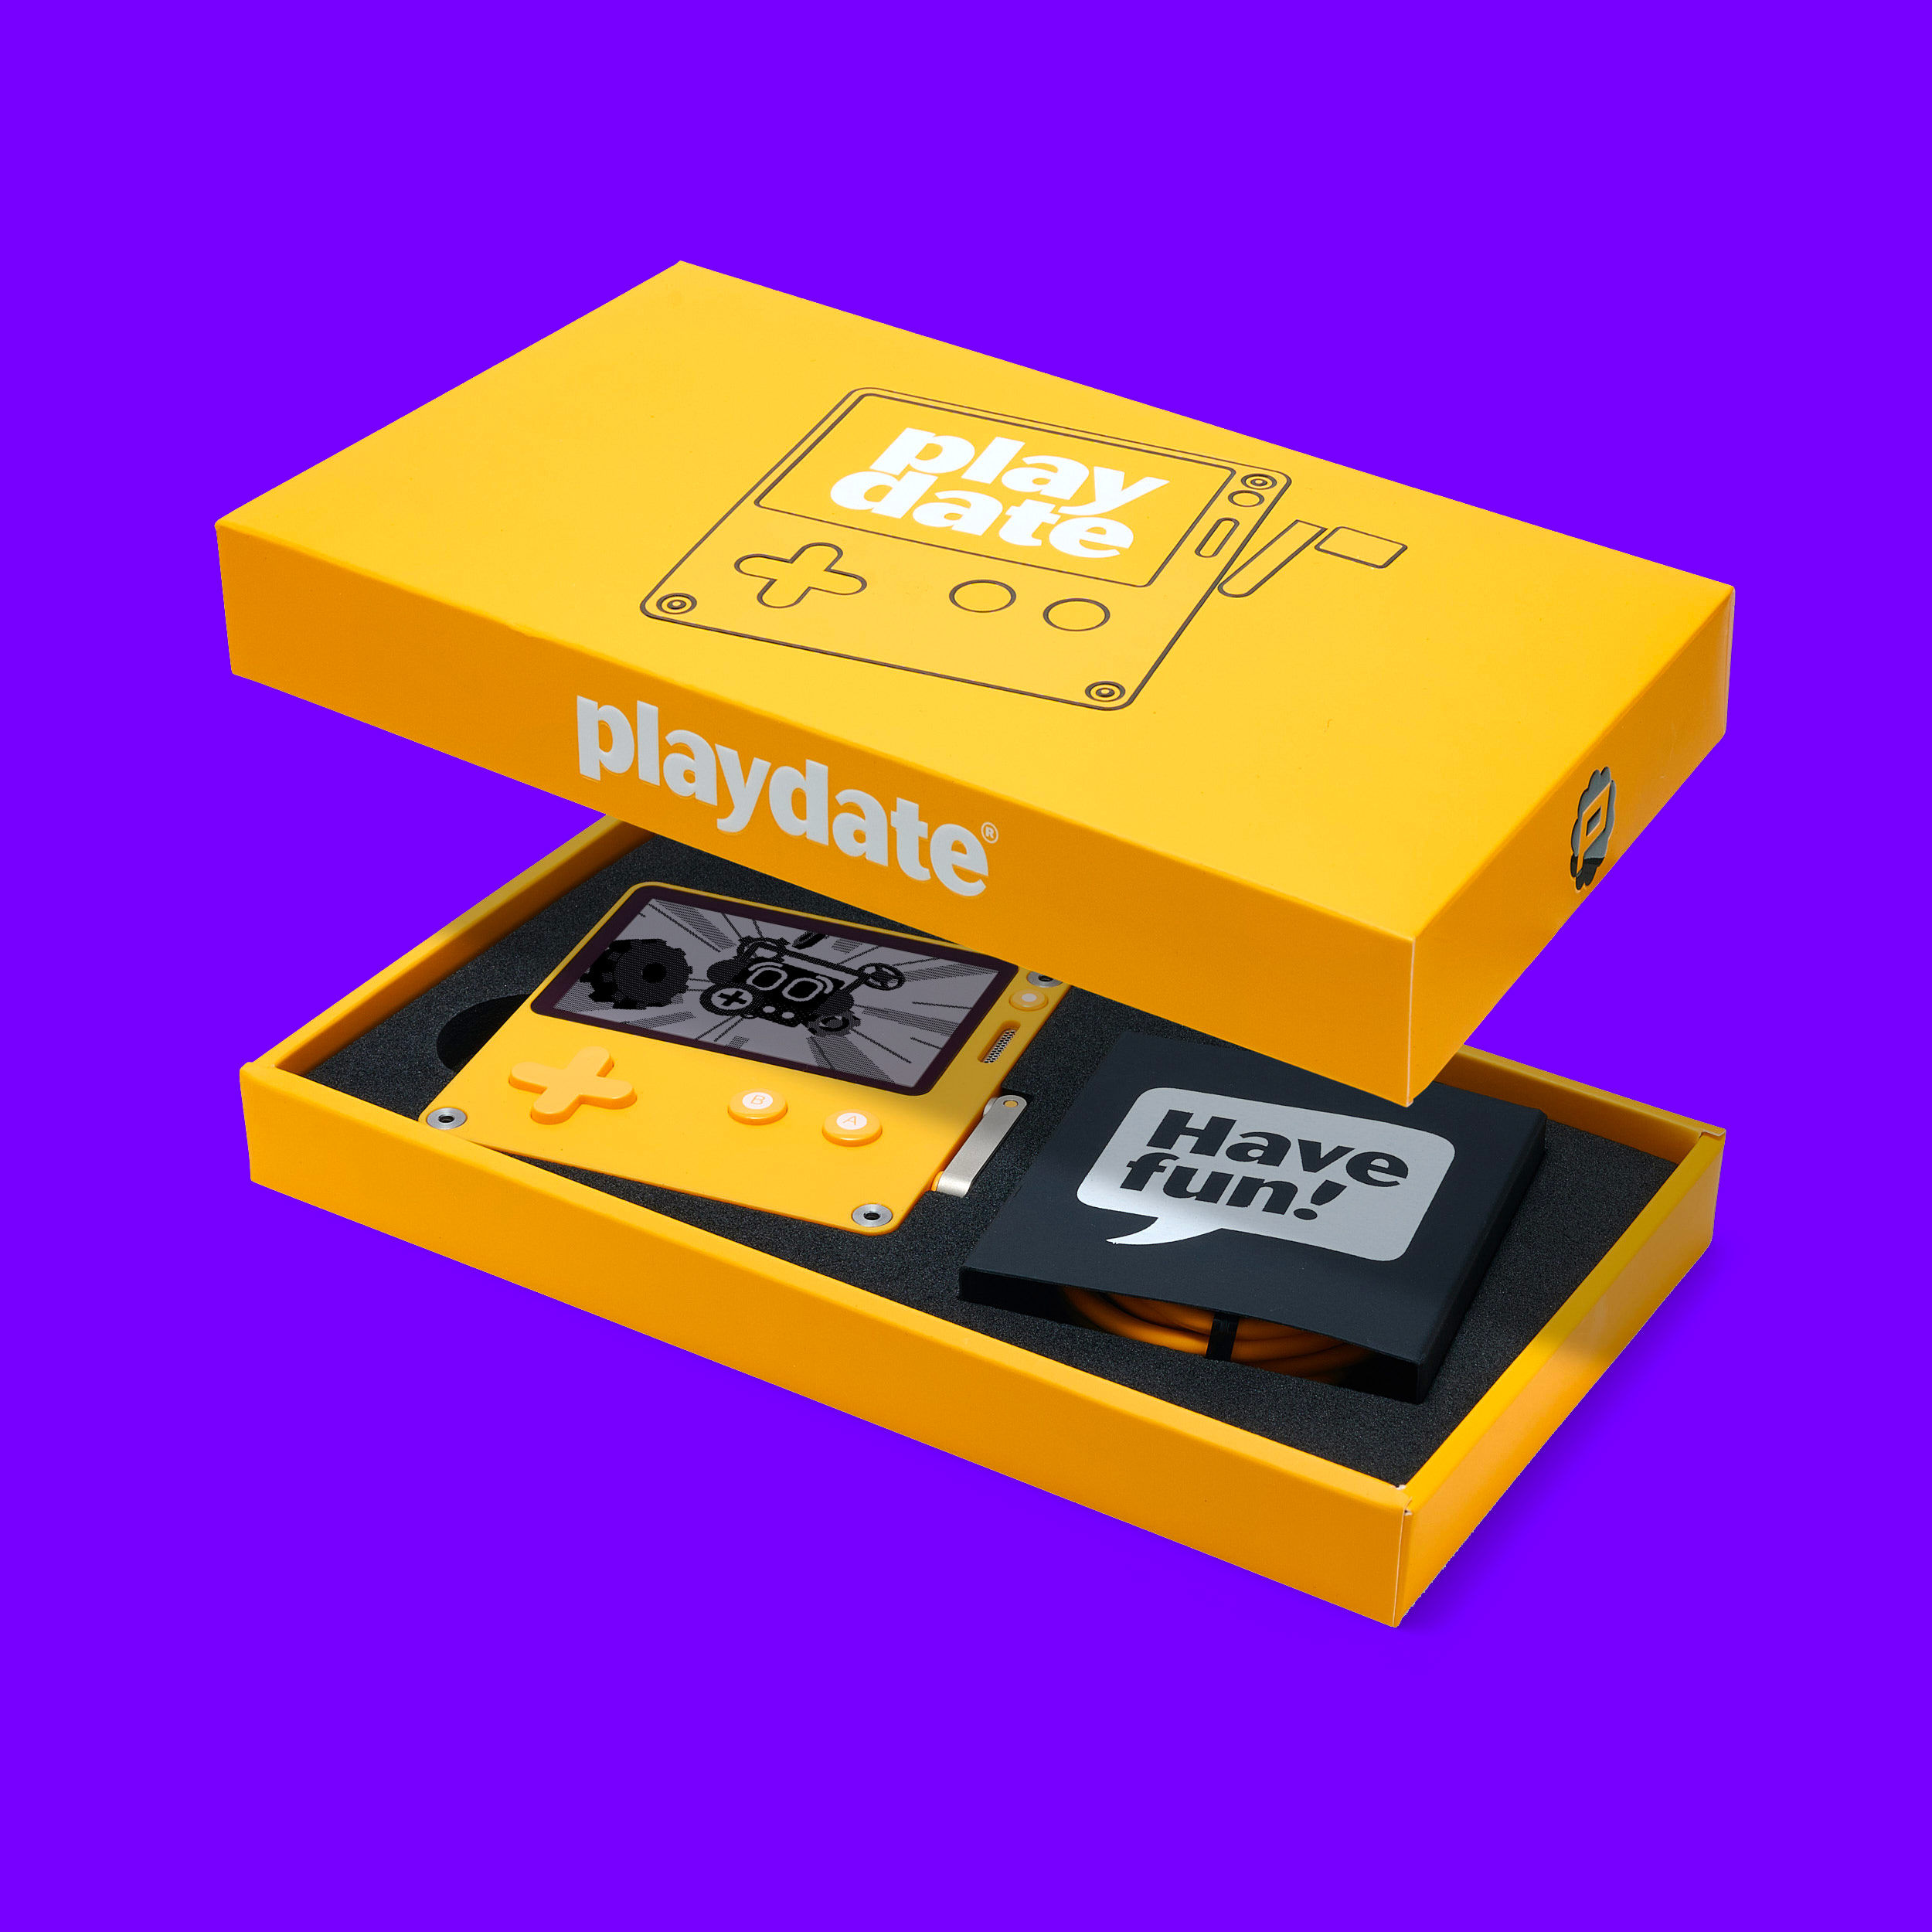 Photo of the Playdate in its yellow box with the lid floating above it